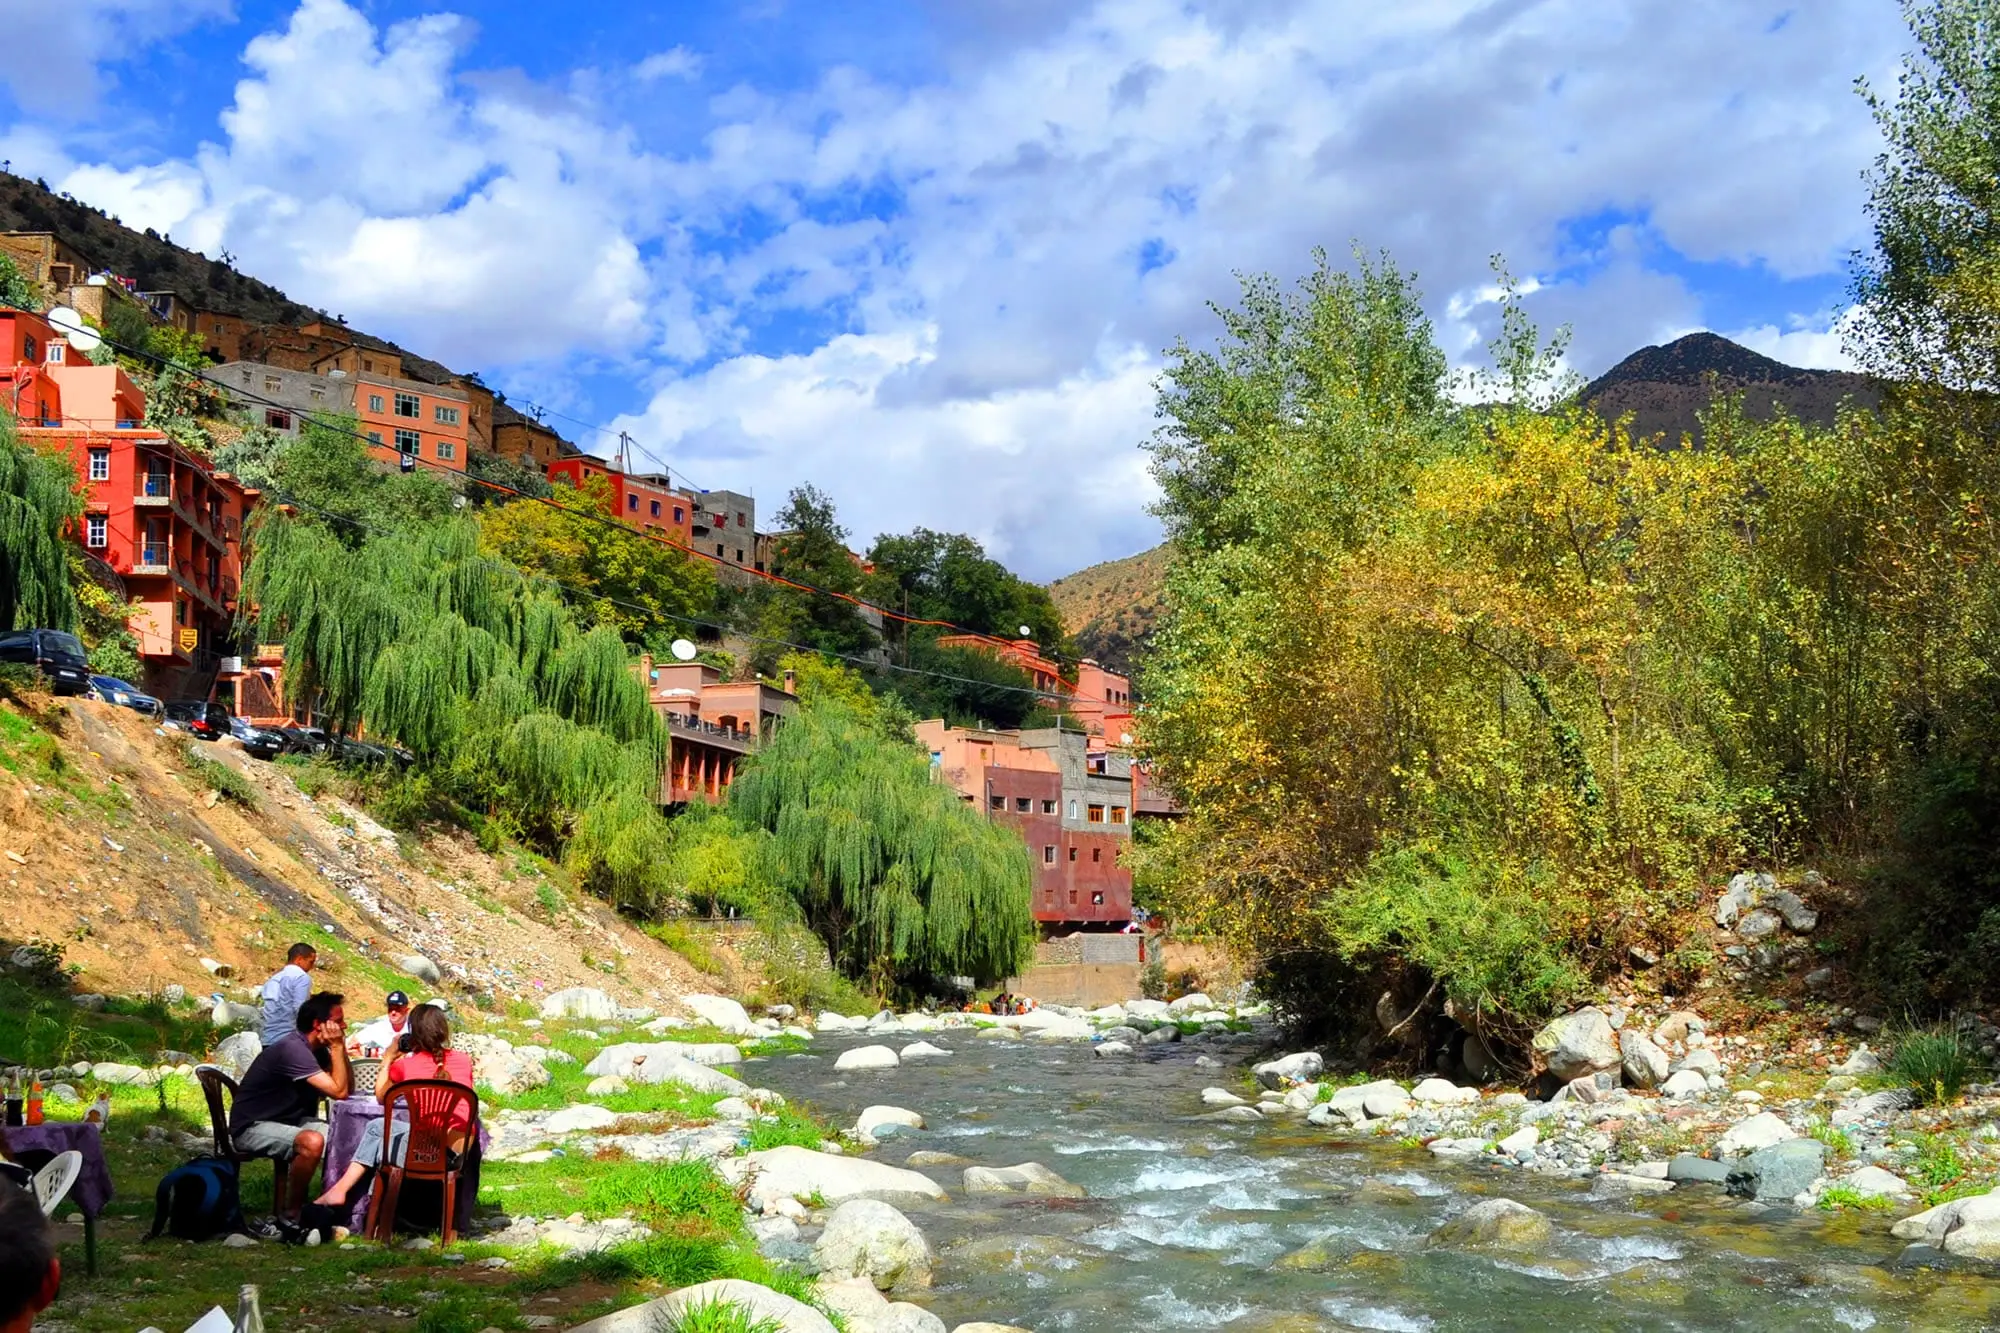 It appears that you are keen to embark on an expedition to the Atlas Mountains, specifically to the Imlil Valley and Asni in Morocco. These are gorgeous and culturally significant regions renowned for their incredible landscapes and customary Berber villages. full-day trip to Imlil and Asni.